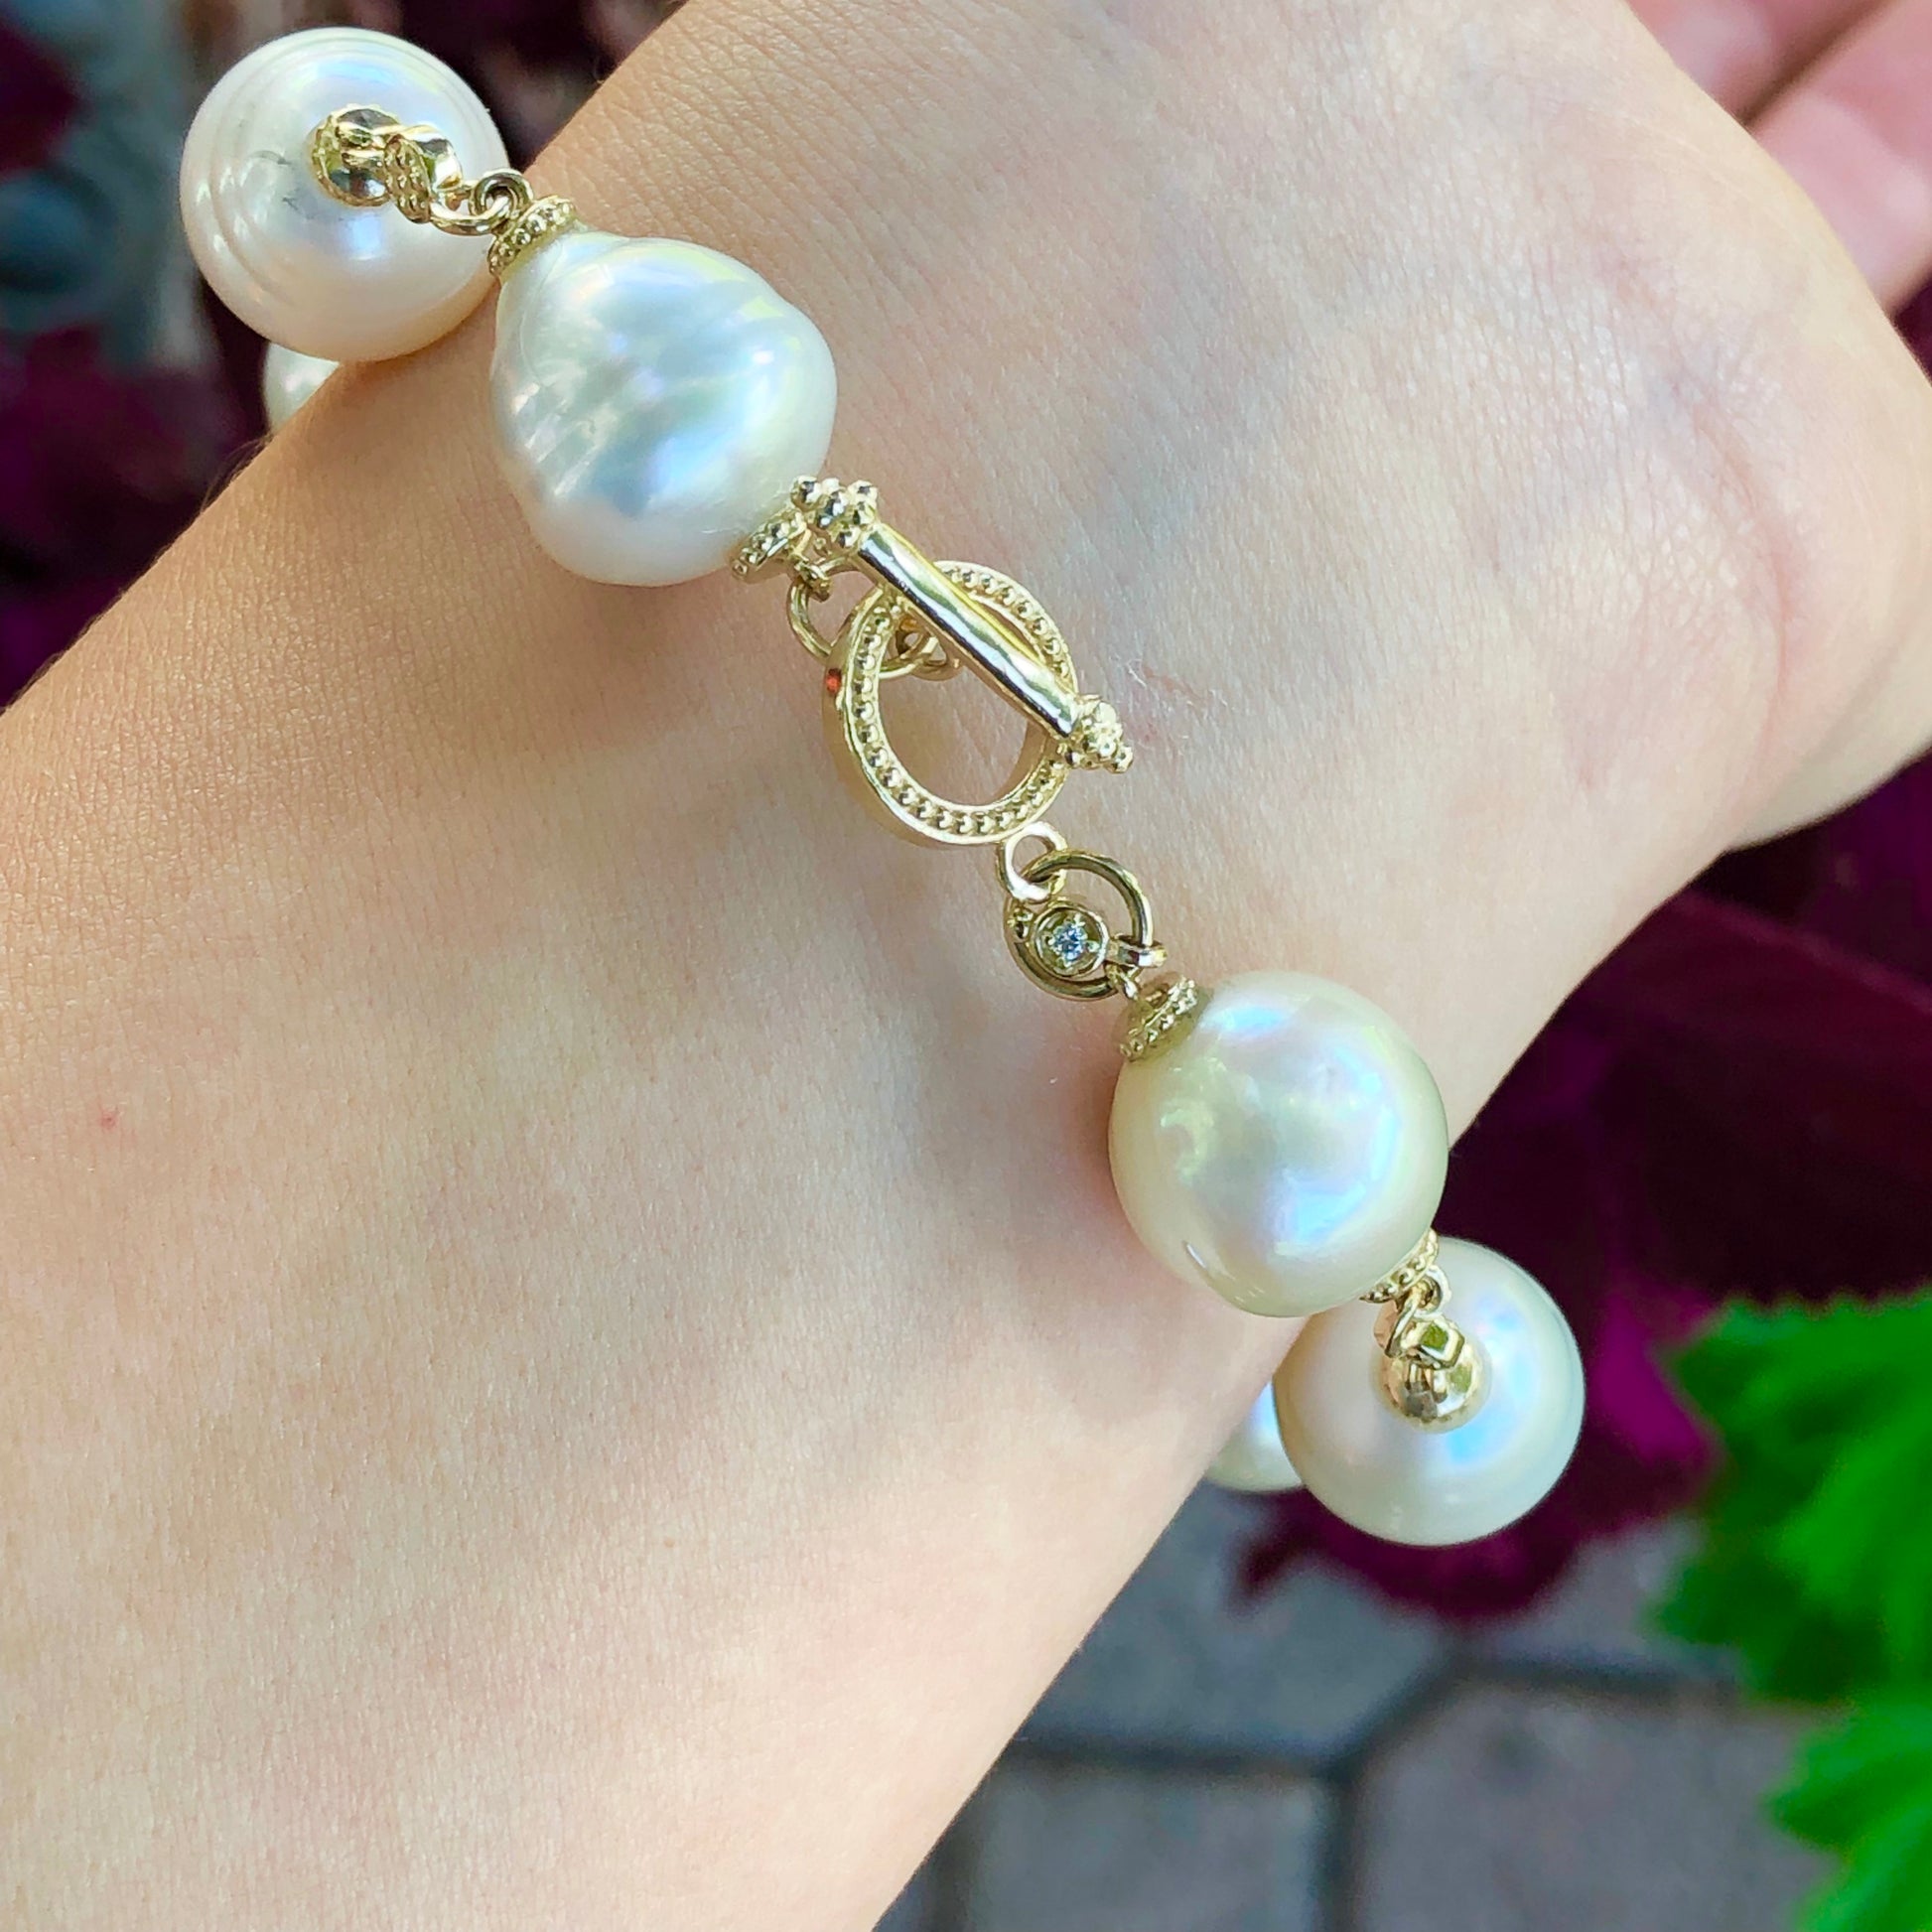 14KT Yellow Gold + Paspaley South Sea Pearl Spacers Bracelet 8", 14KT Yellow Gold + Paspaley South Sea Pearl Spacers Bracelet 8" - Legacy Saint Jewelry